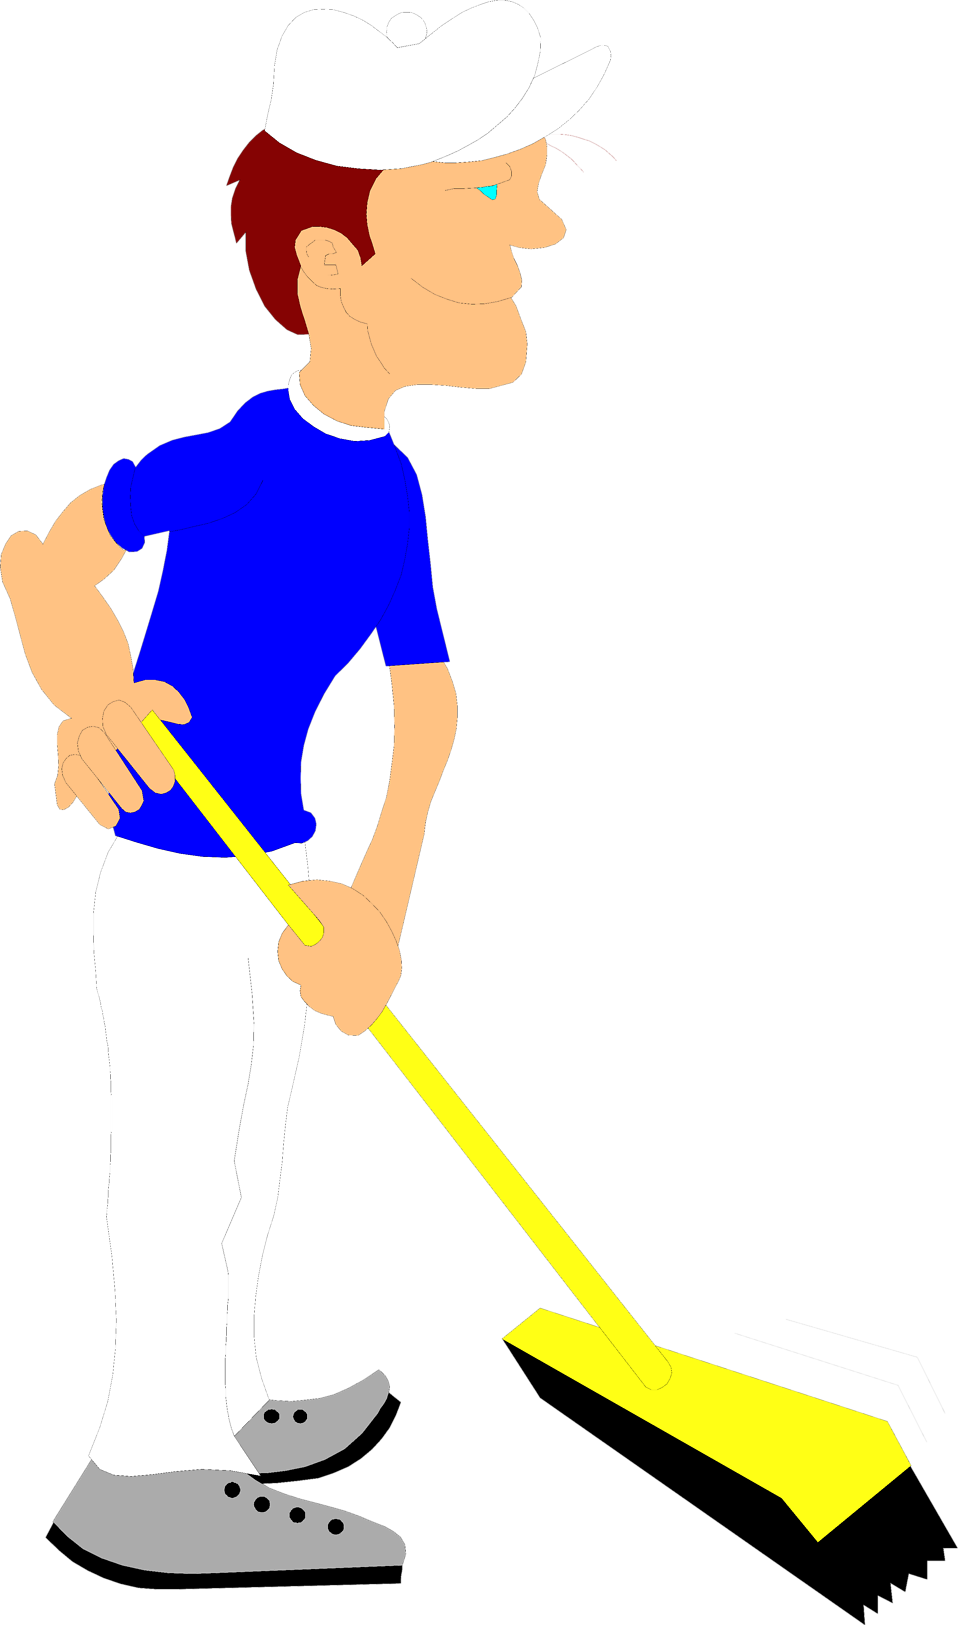 school janitor clipart - photo #37